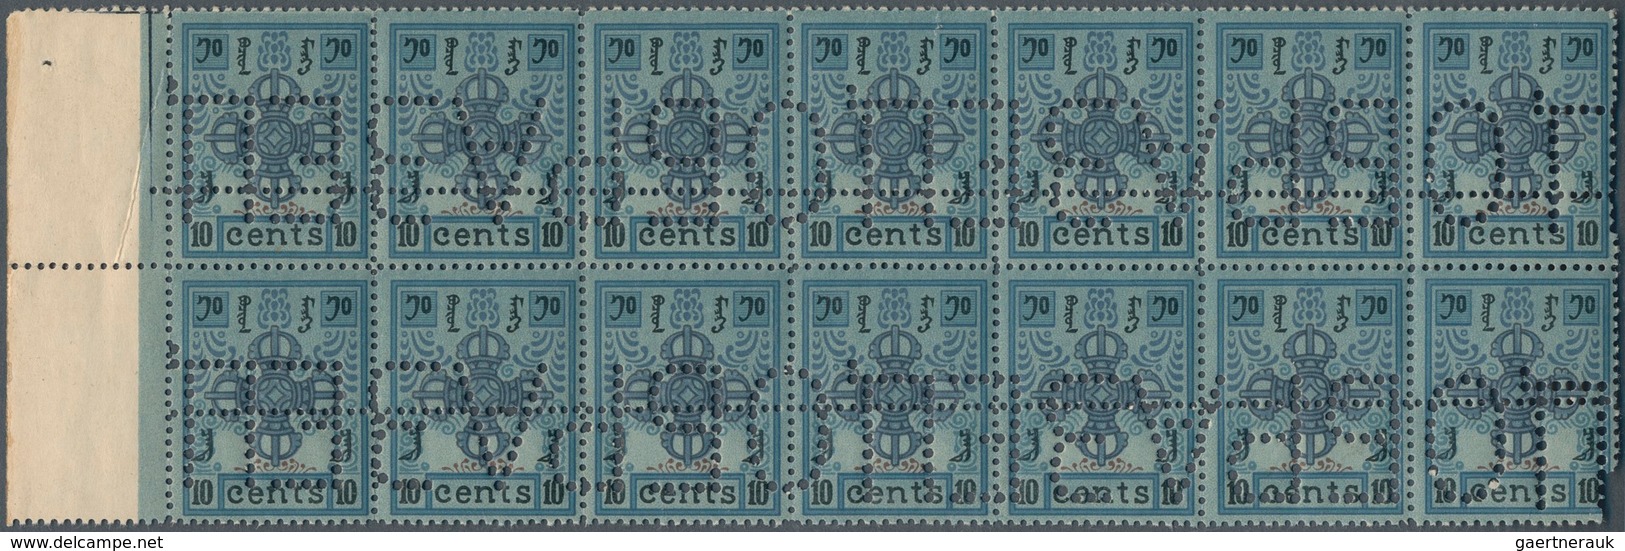 09562 Mongolei: 1924 First Issue 10c. Left Hand Marginal Block Of 14 (2x7), Perf 13½, Additionally Perfora - Mongolie